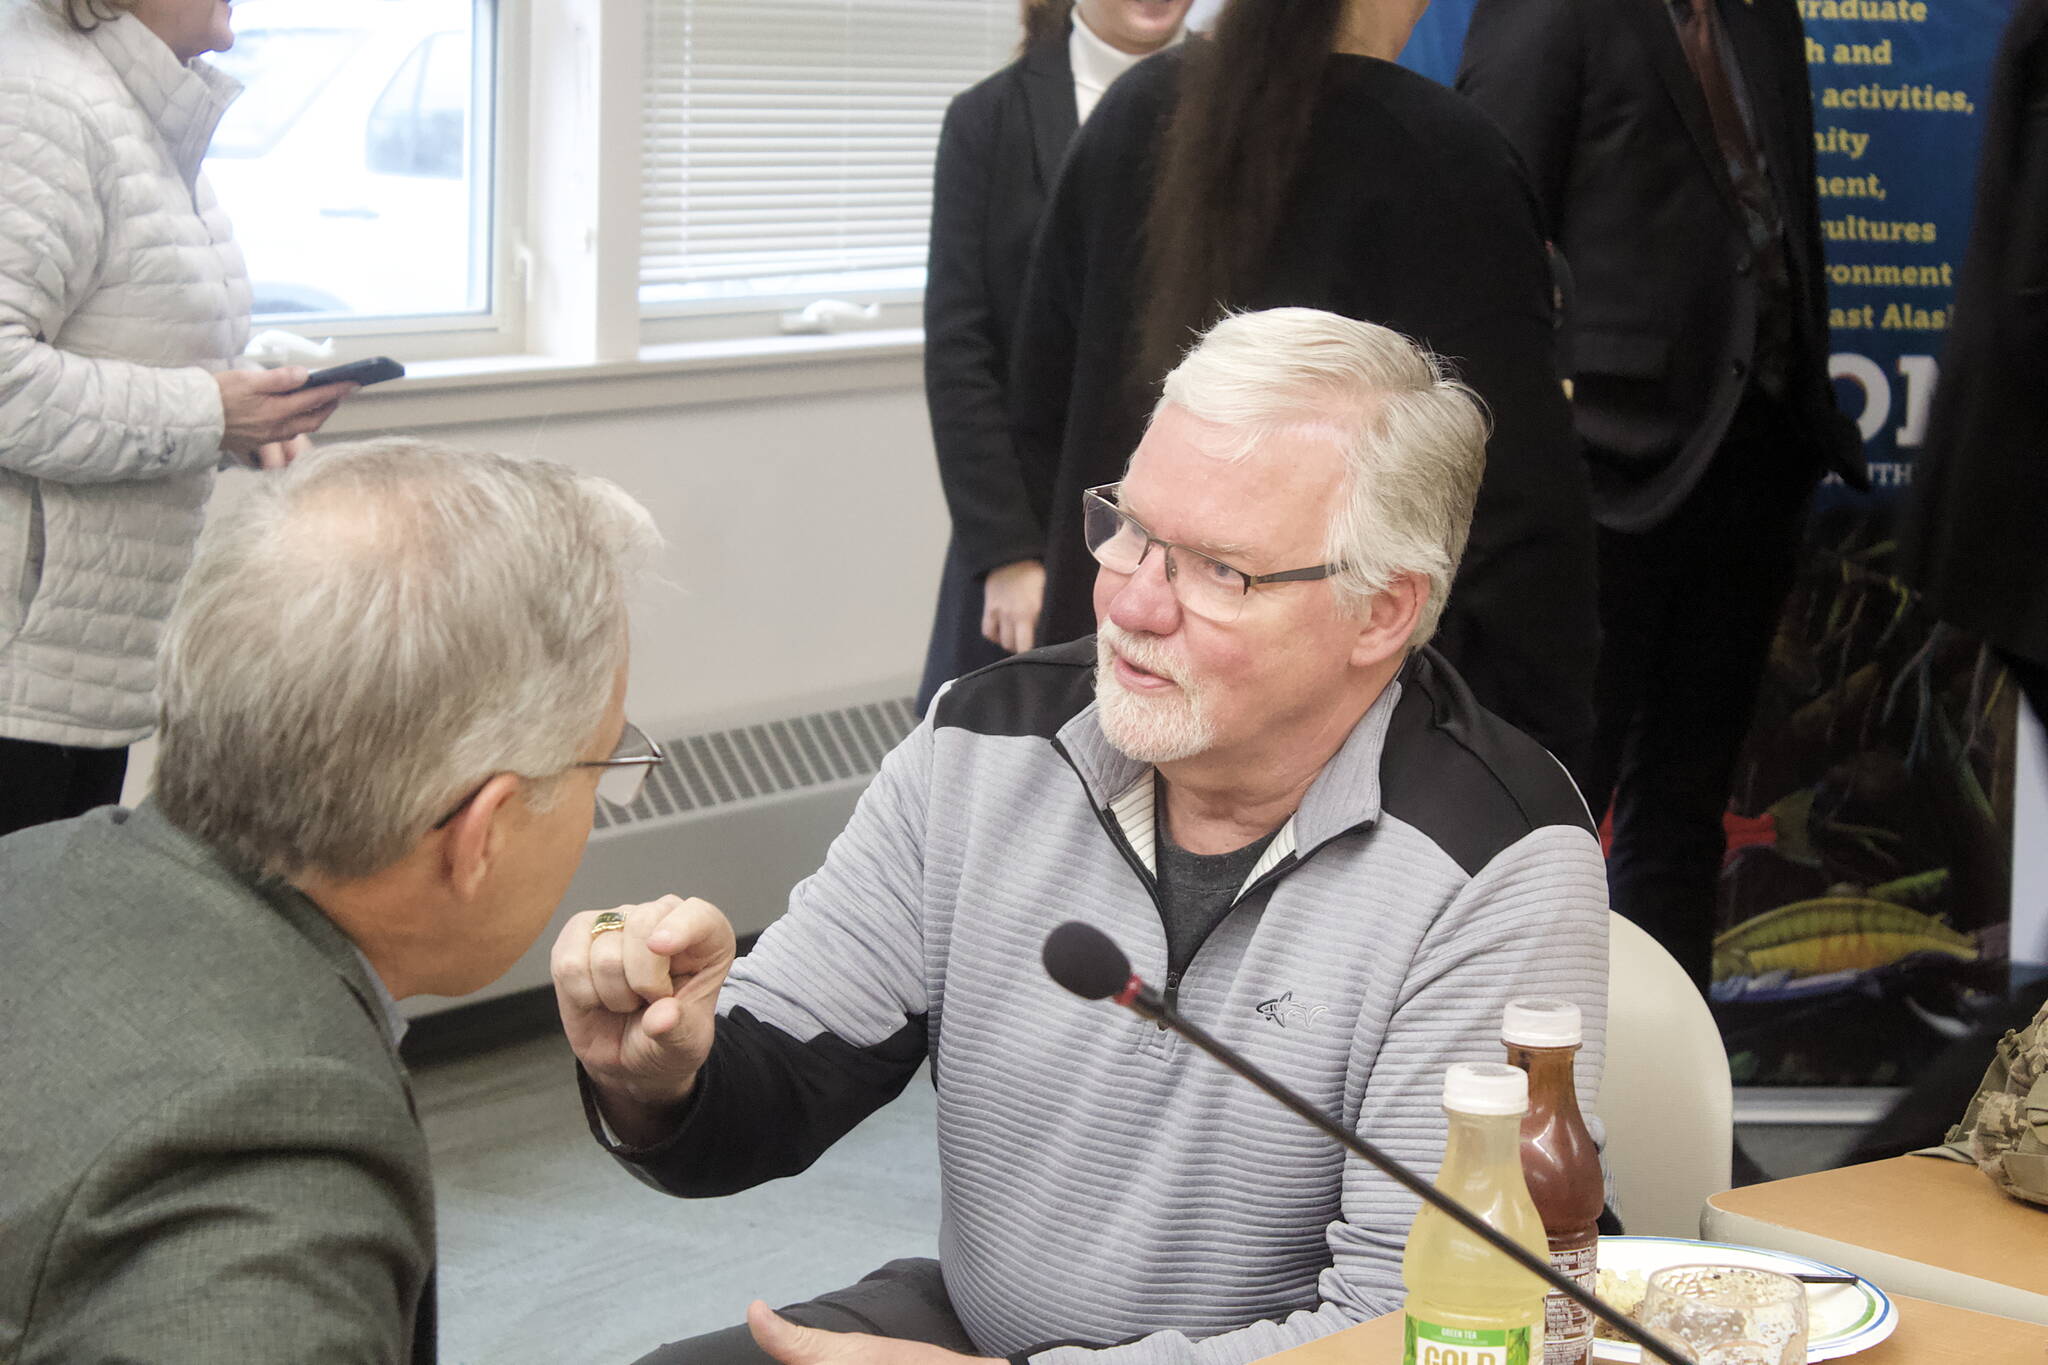 Dale Anderson, a member of the University of Alaska’s Board of Regents, talks with fellow member Ralph Seekins after the conclusion of the board’s two-day meeting at the University of Alaska Southeast on Friday. Anderson was harshly critical during Friday’s meetings of changes to Title IX, which is again being revised in anticipation of pending changes at the federal level, saying it’s being expanded in “insidious” ways beyond its original intent. (Mark Sabbatini / Juneau Empire)